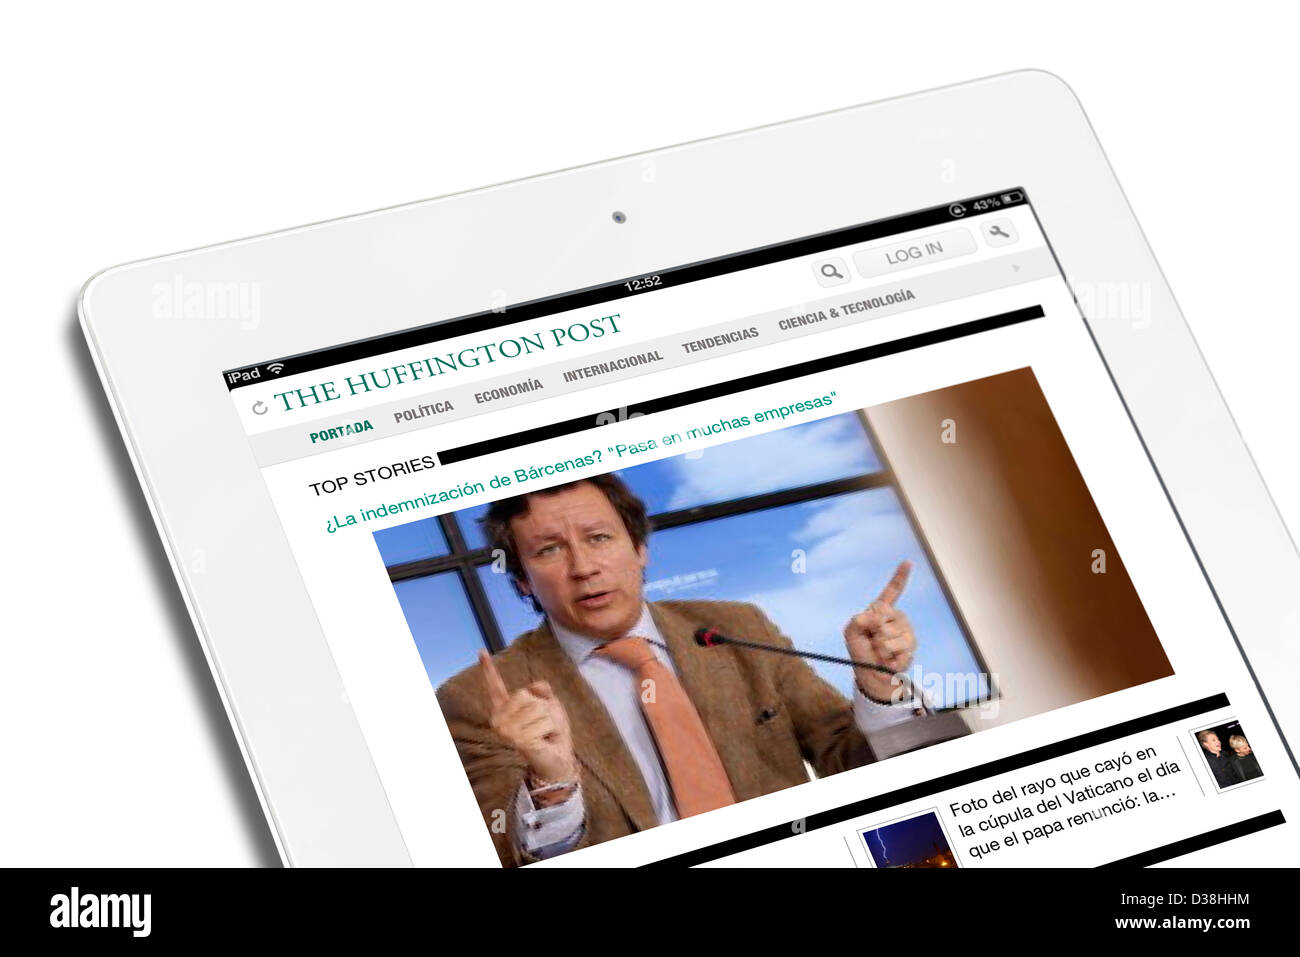 iPad App showing the Spanish edition of the Huffington Post viewed on a 4th generation Apple iPad Stock Photo